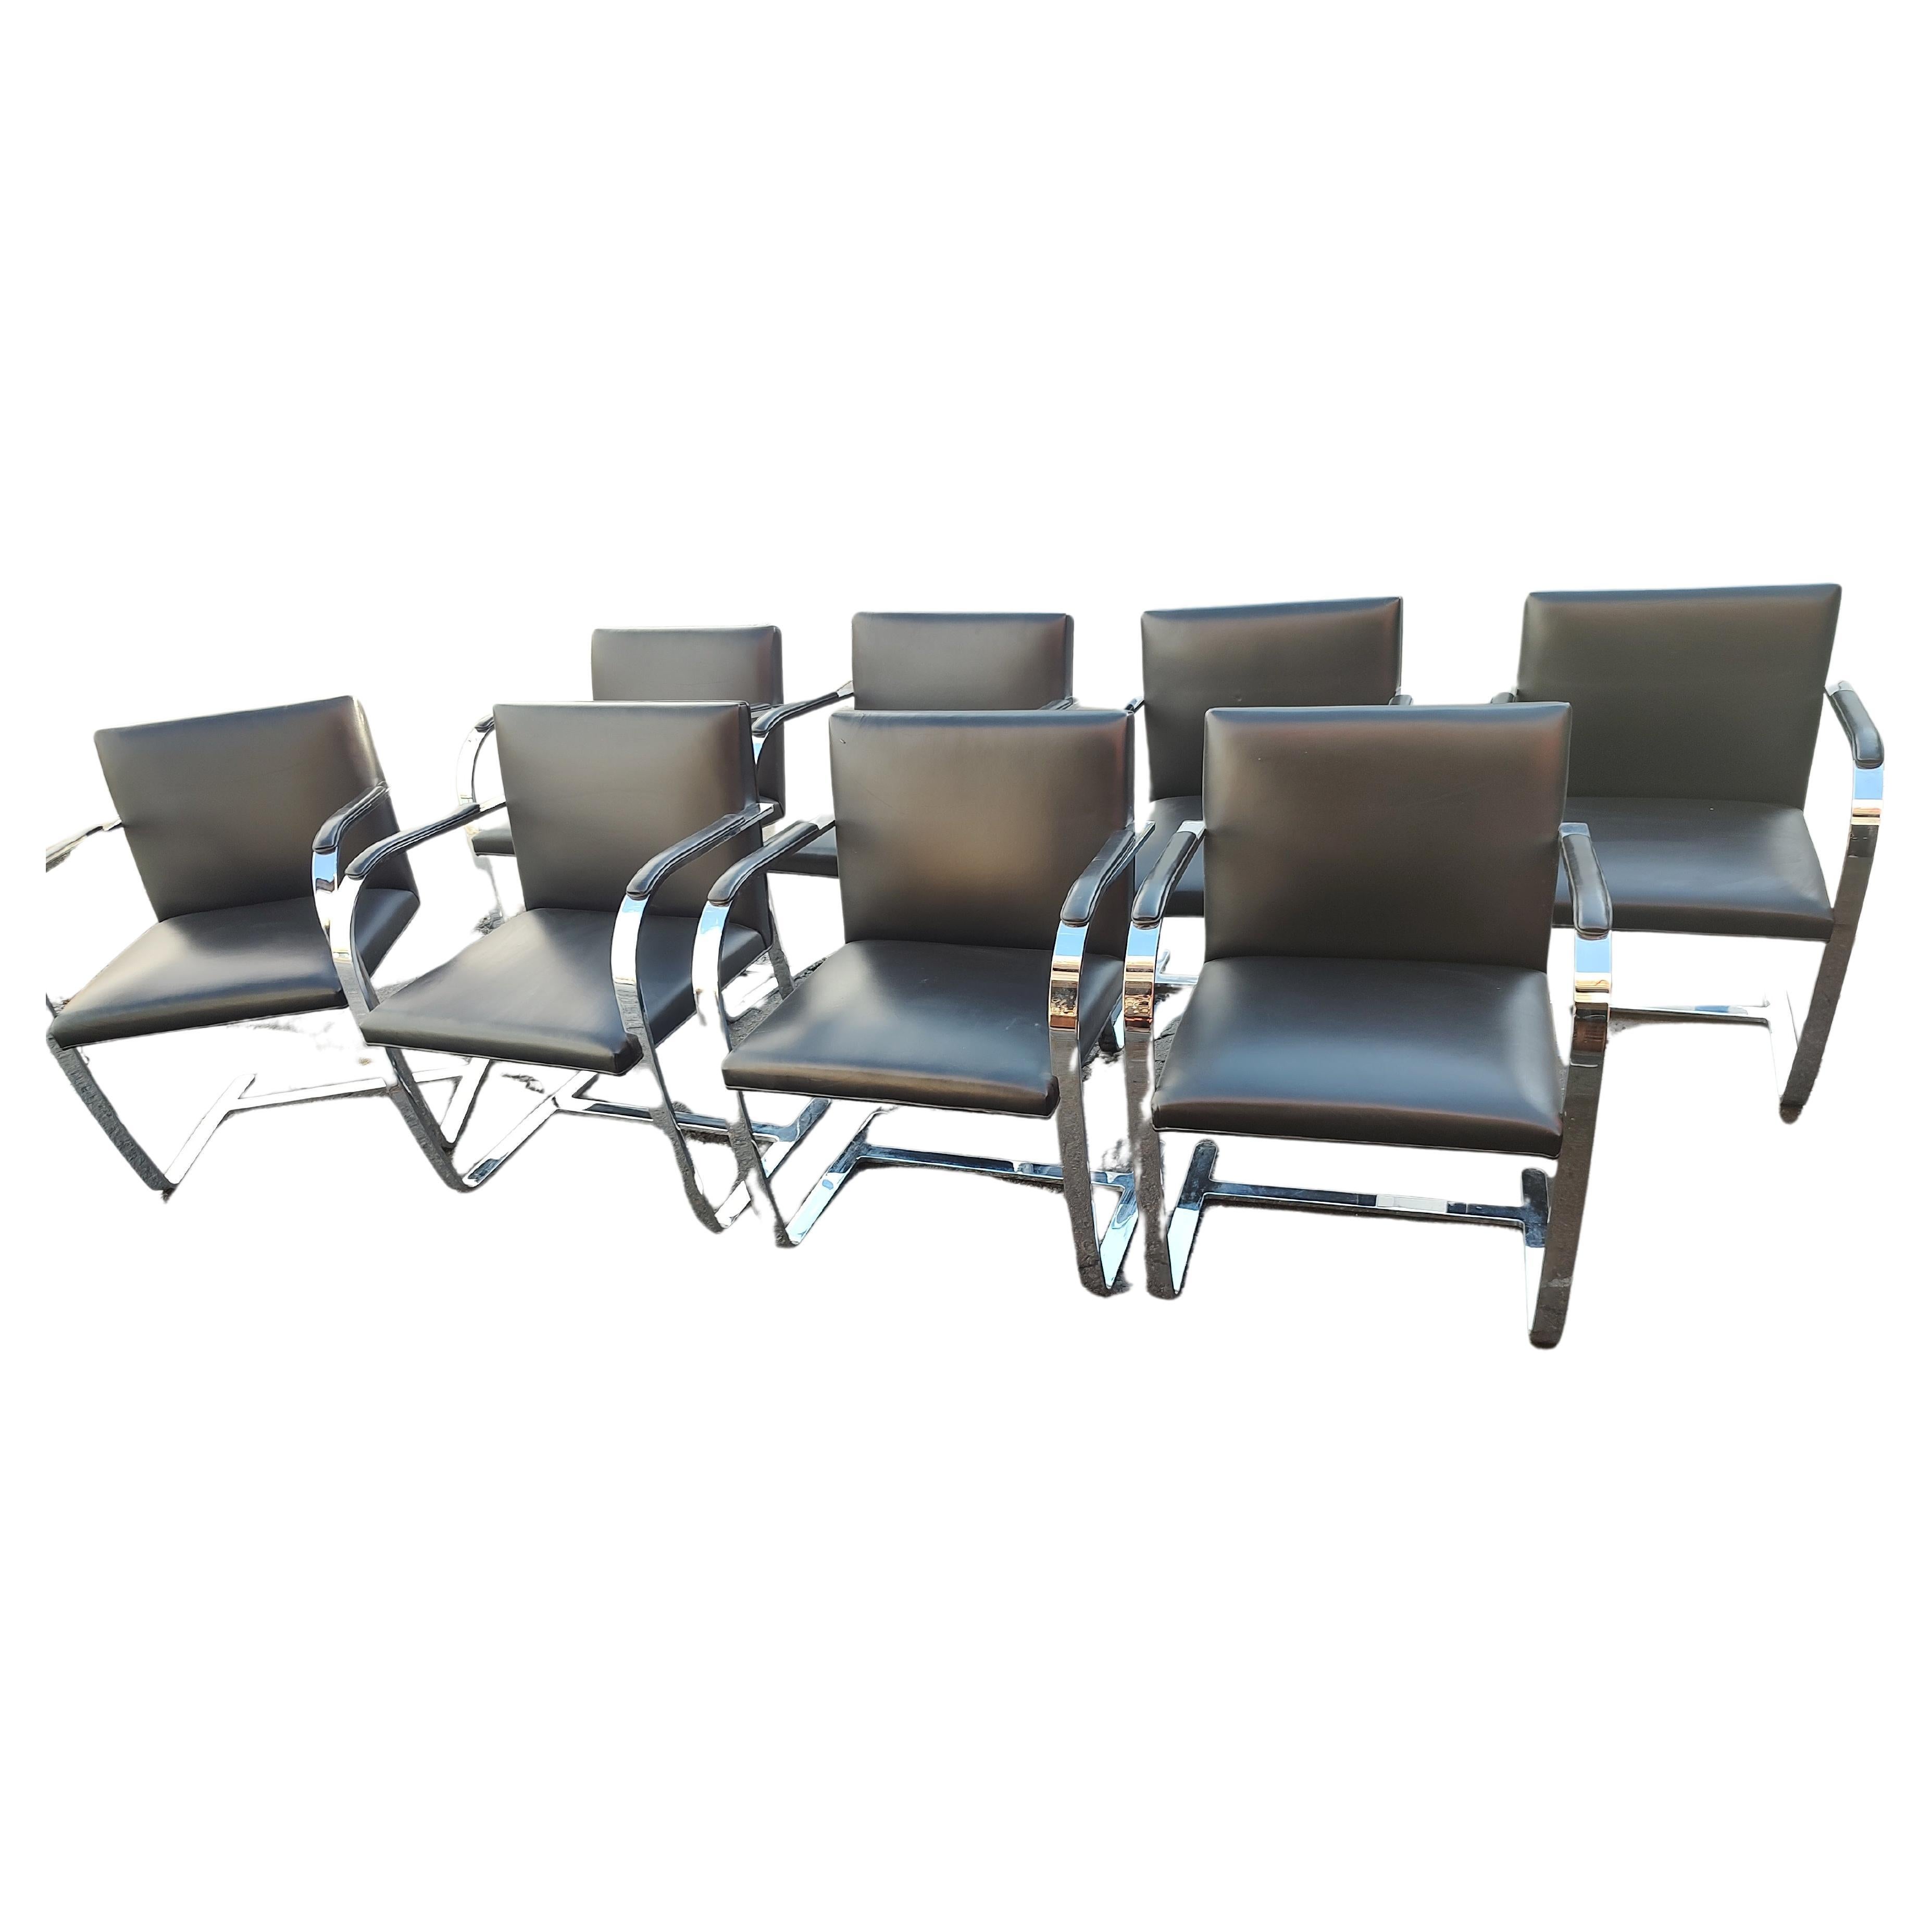 Mid-Century Modern Set of 8 Knoll Black Leather Flat Bar Brno Chairs by Ludwig Mies van der Rohe  For Sale